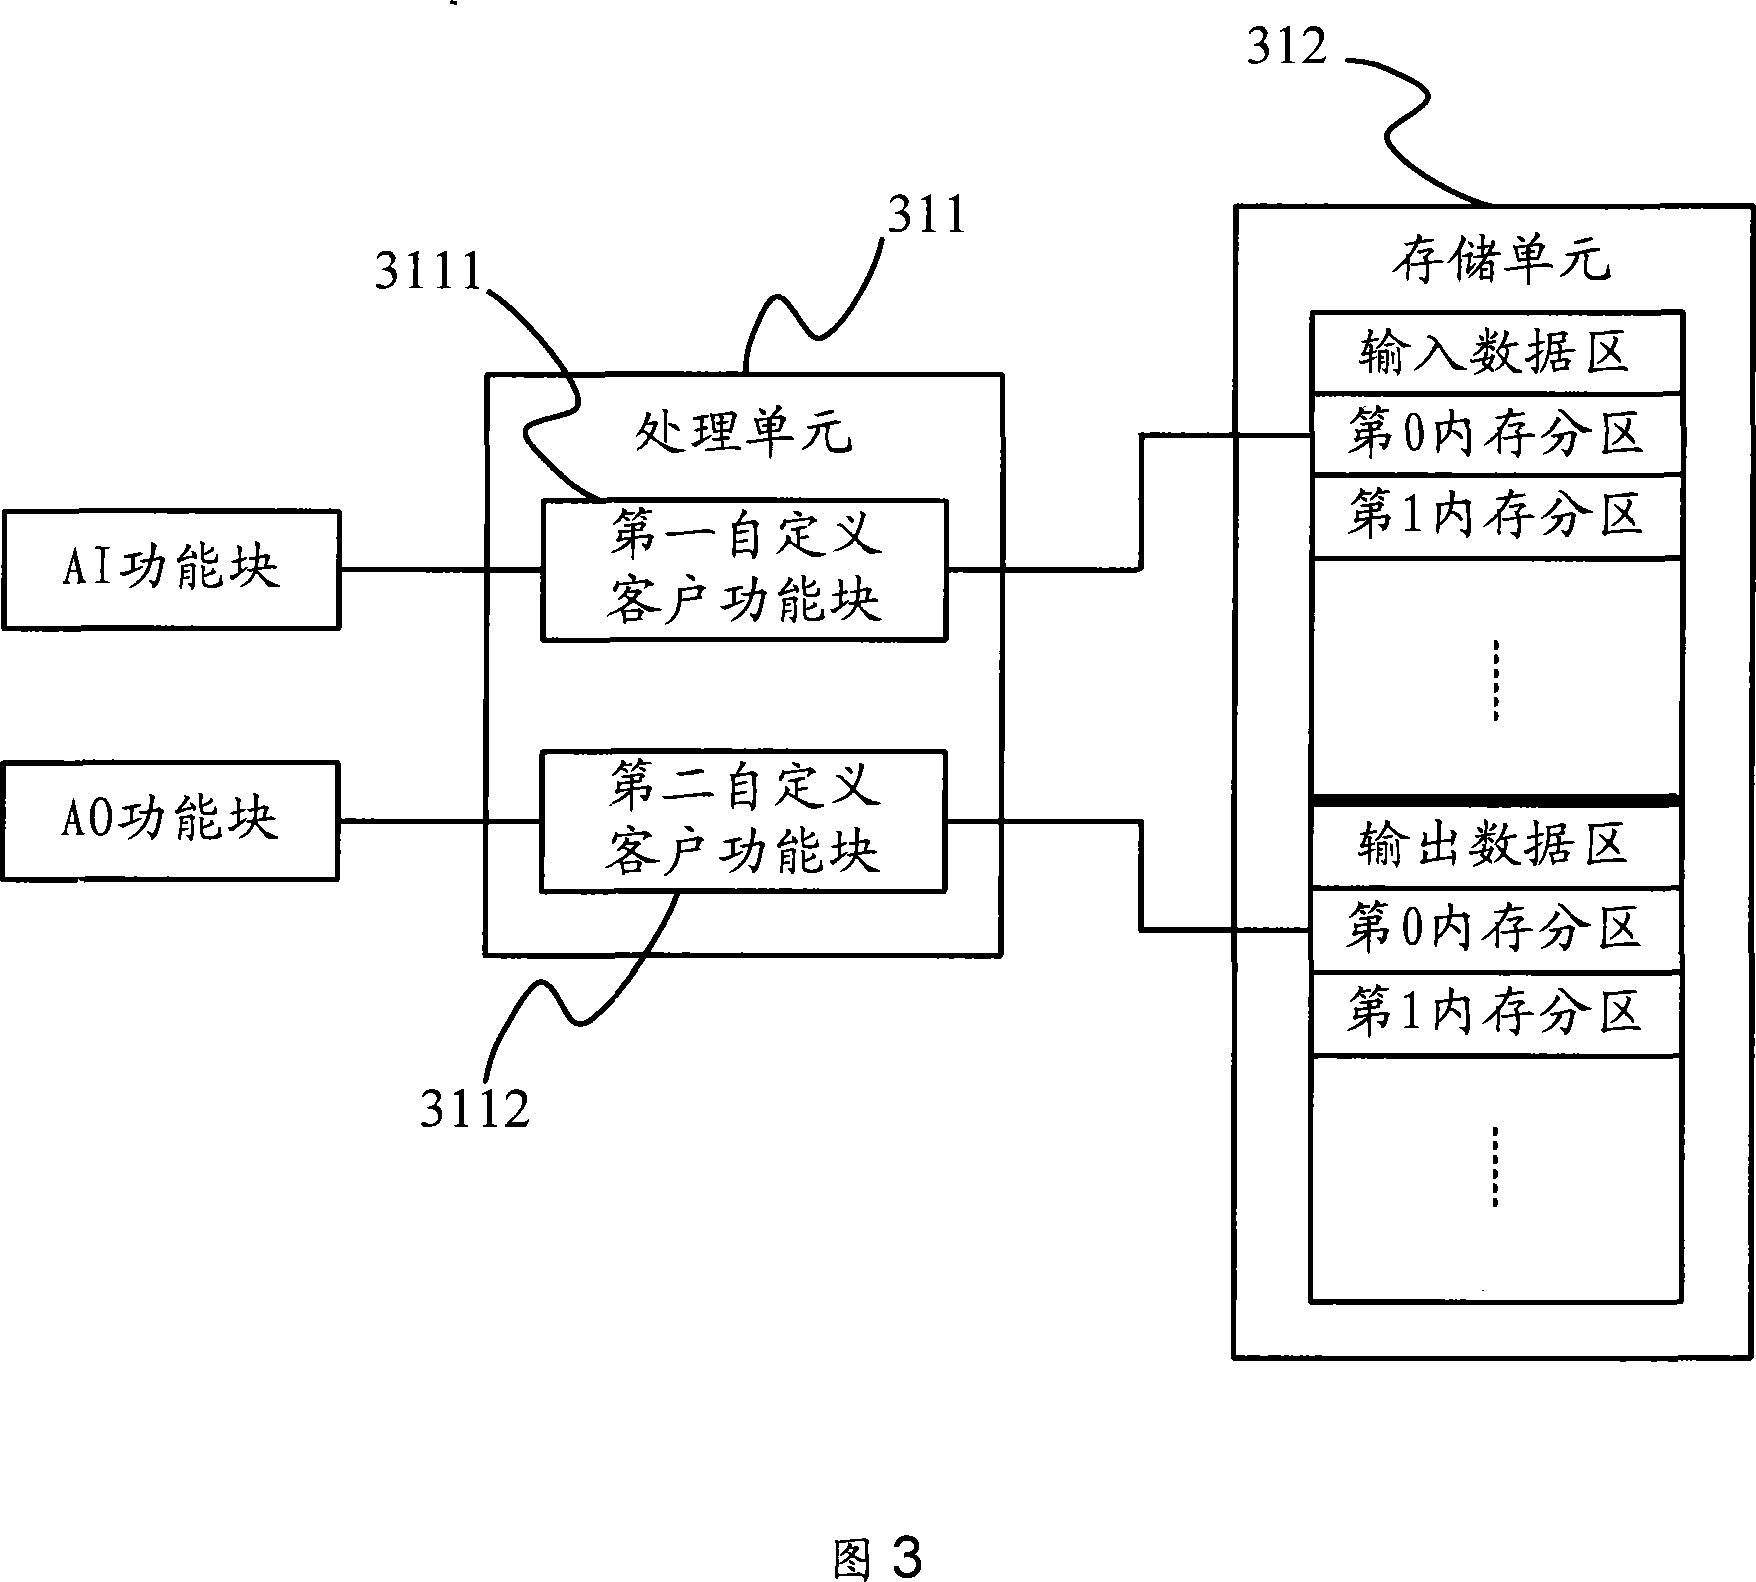 Control system including FF protocol H1 network segment and interface arrangement and communication method